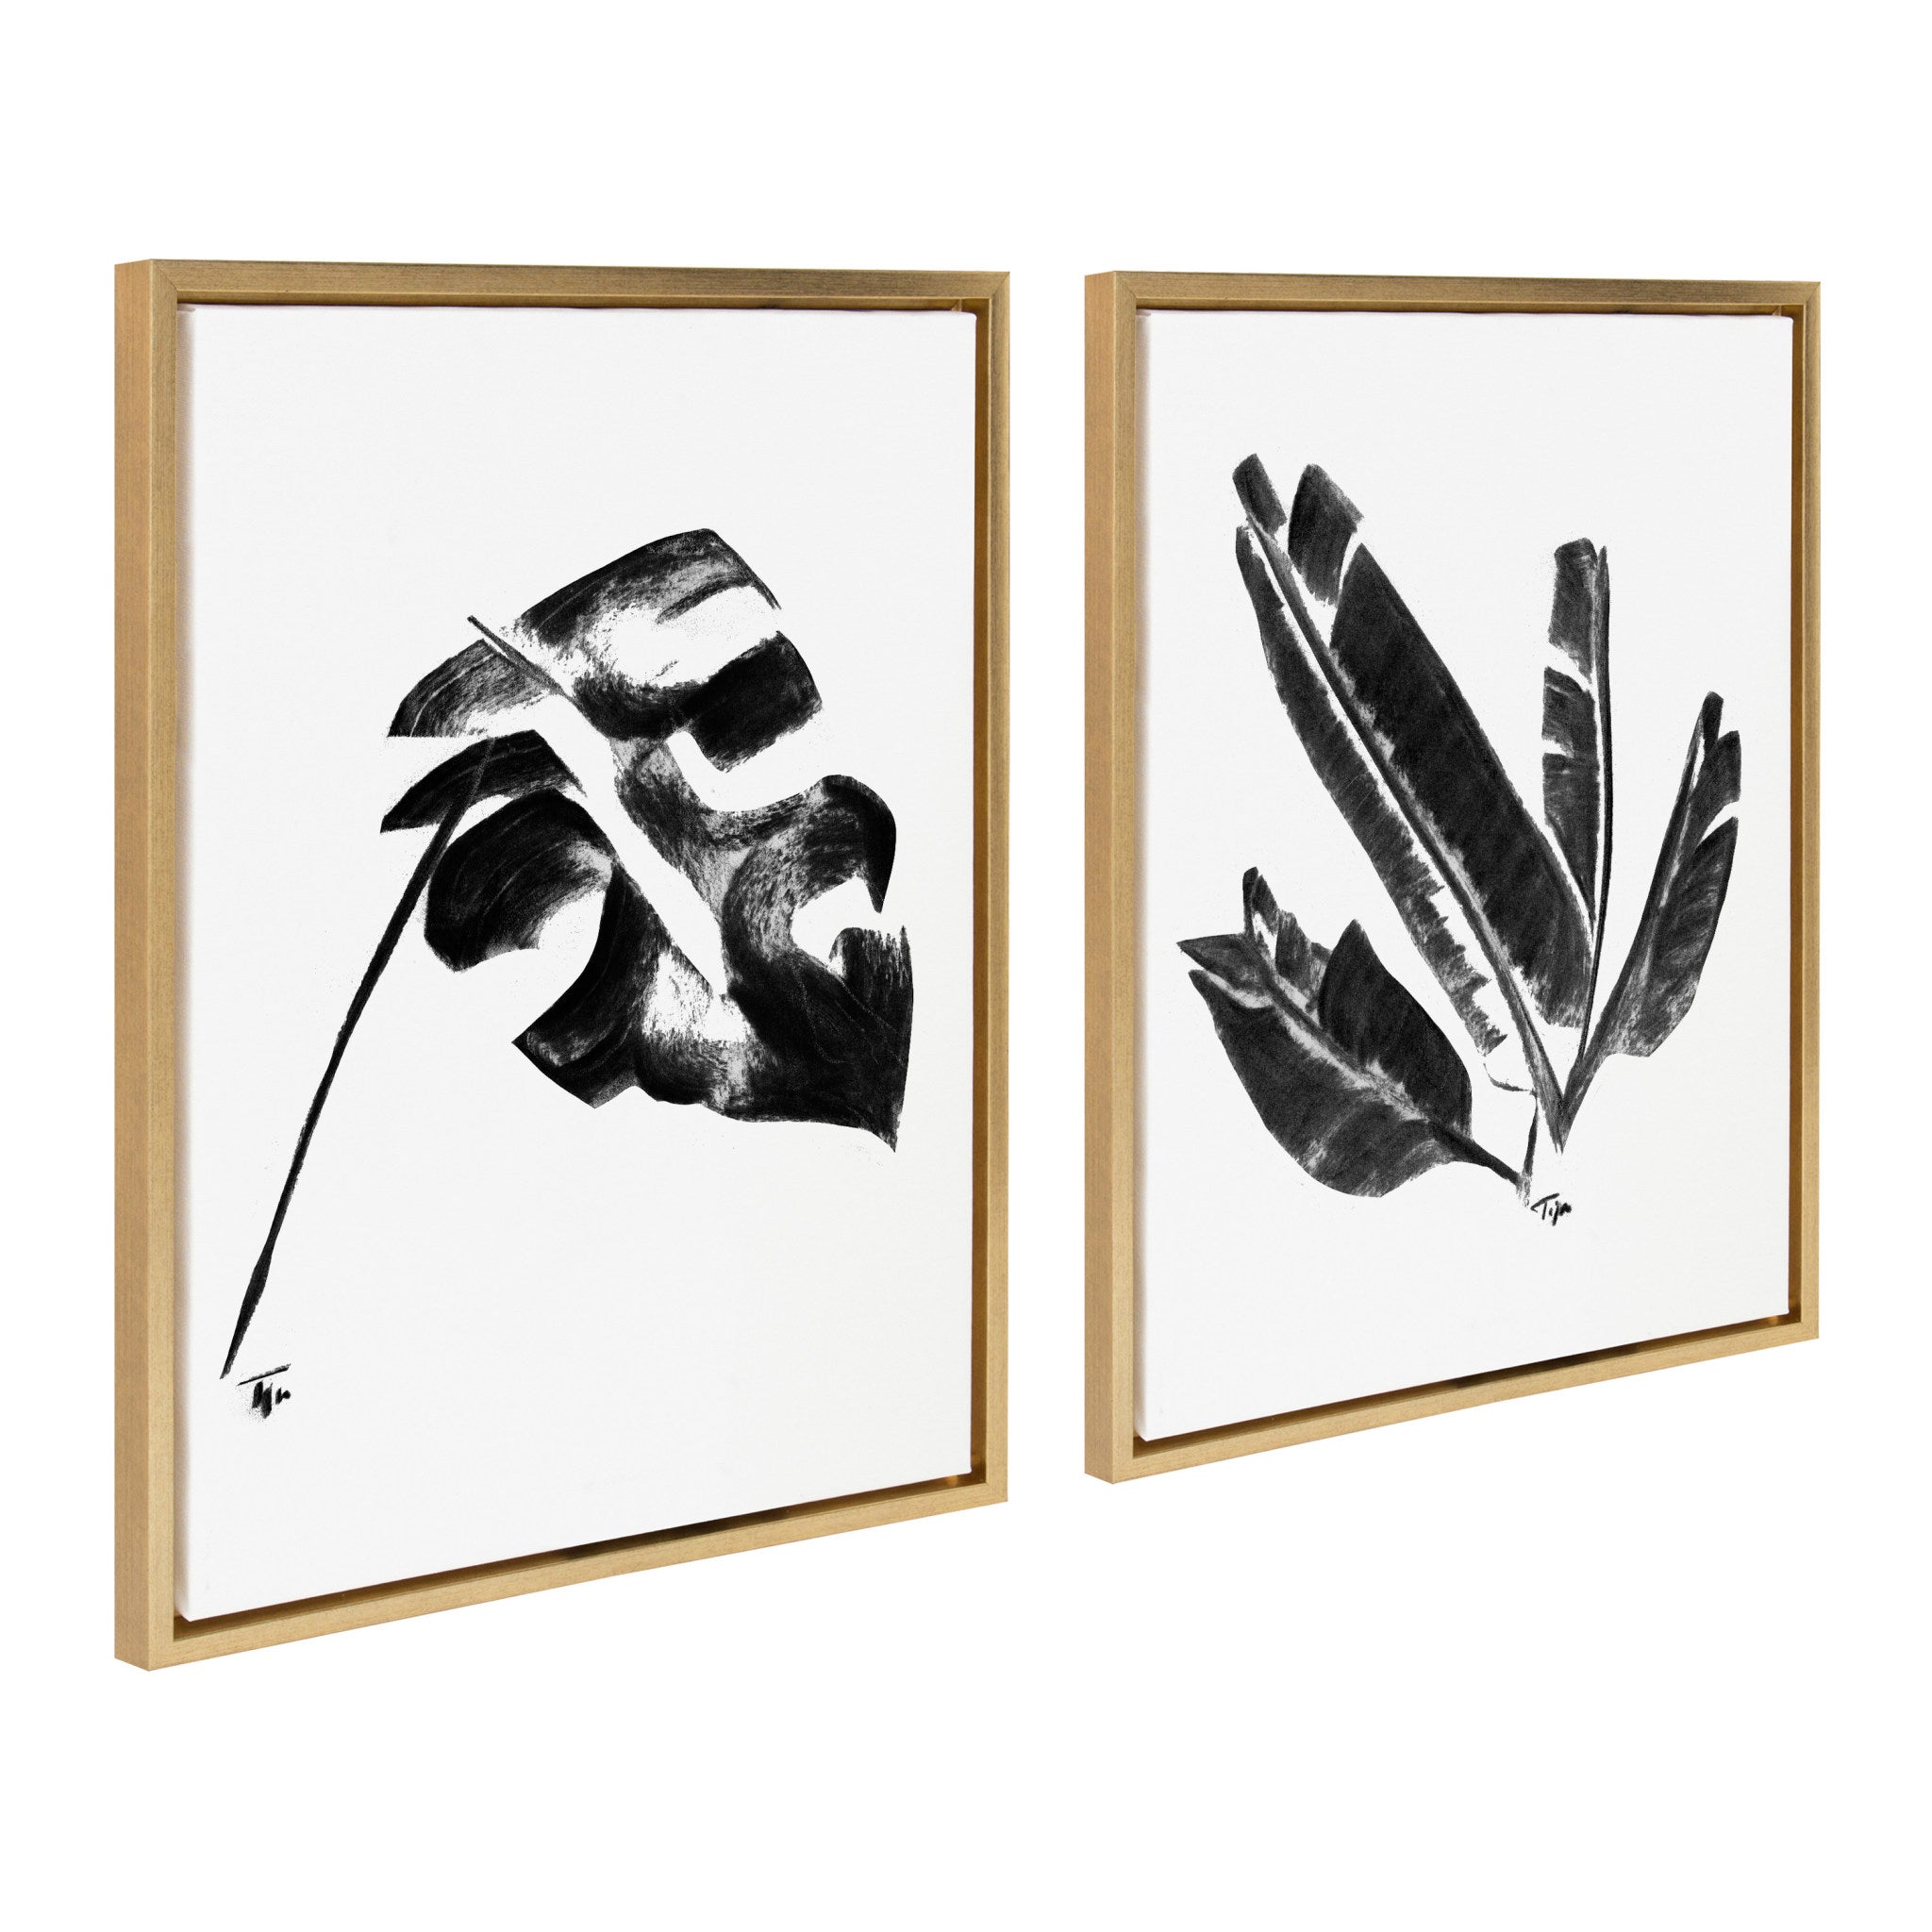 Sylvie 582 Monstera and 583 Banana Leaf Framed Canvas by Teju Reval of SnazzyHues